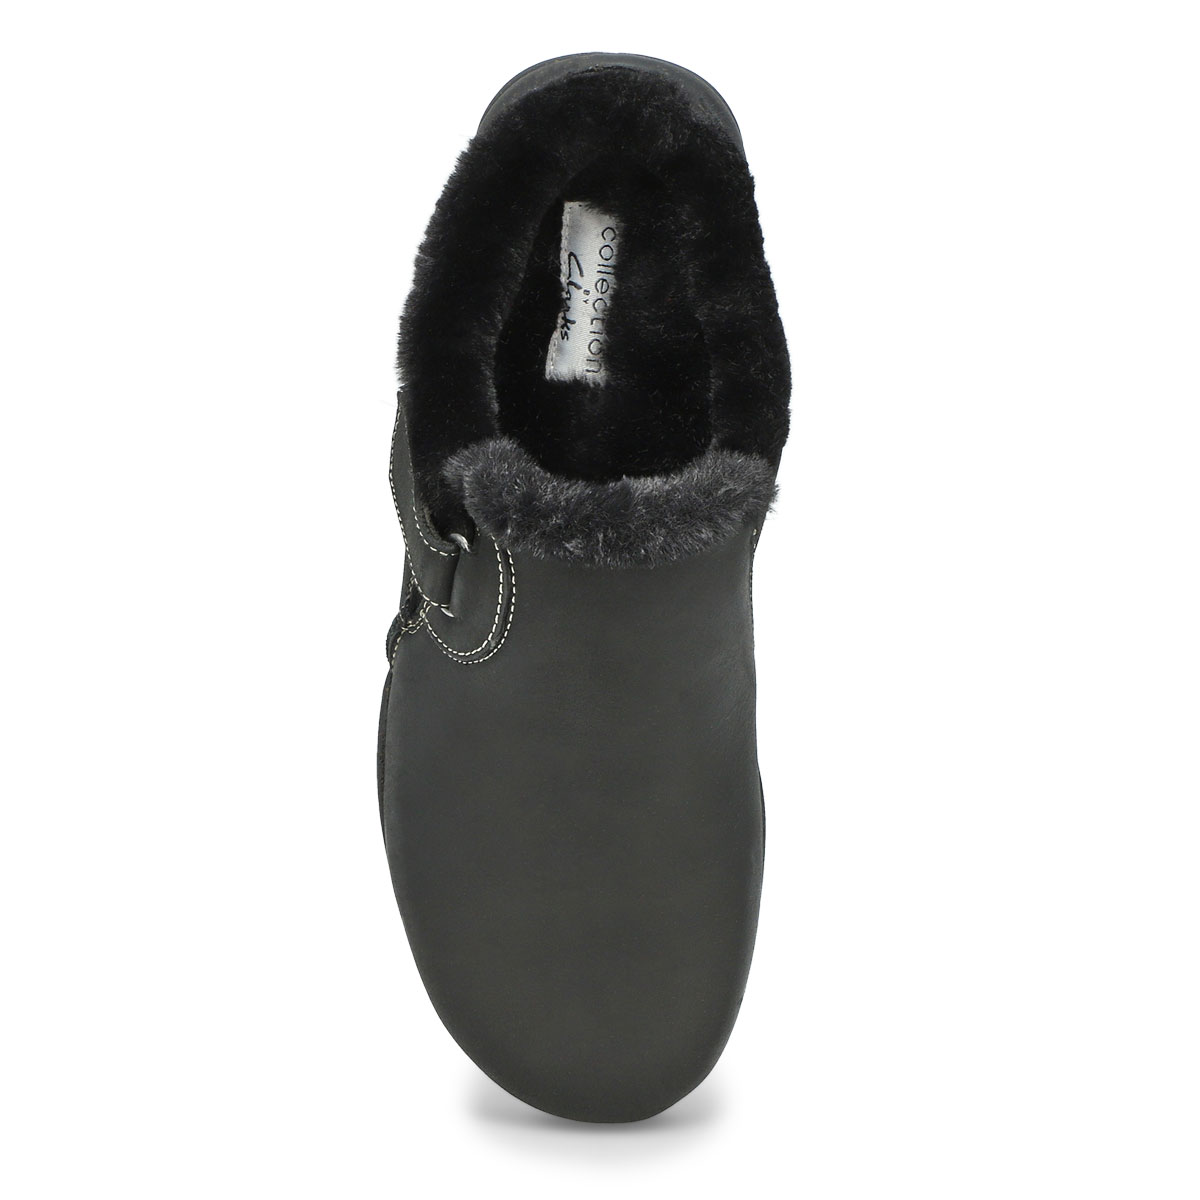 Women's Roseville Casual Low Wide Clog - Black